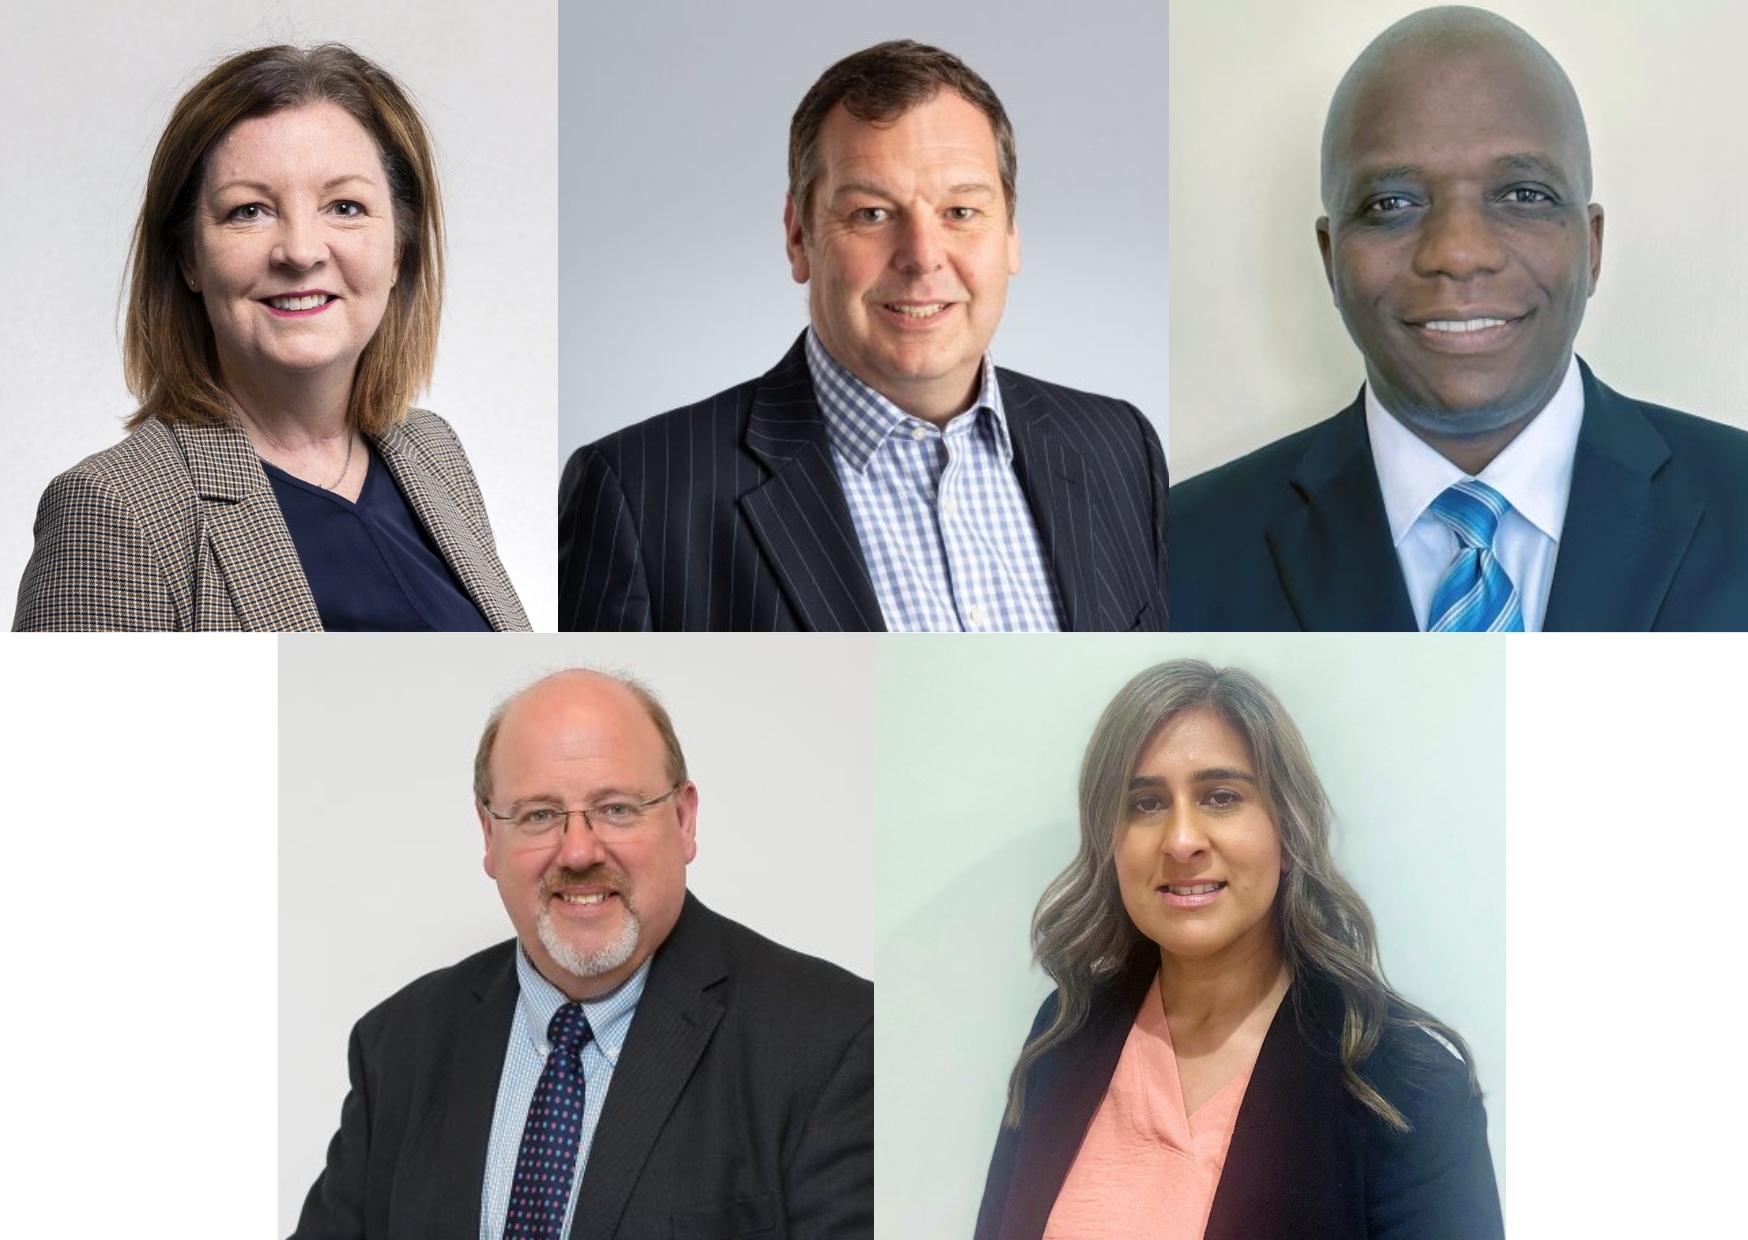 Transaid grows Board with new Trustee appointments